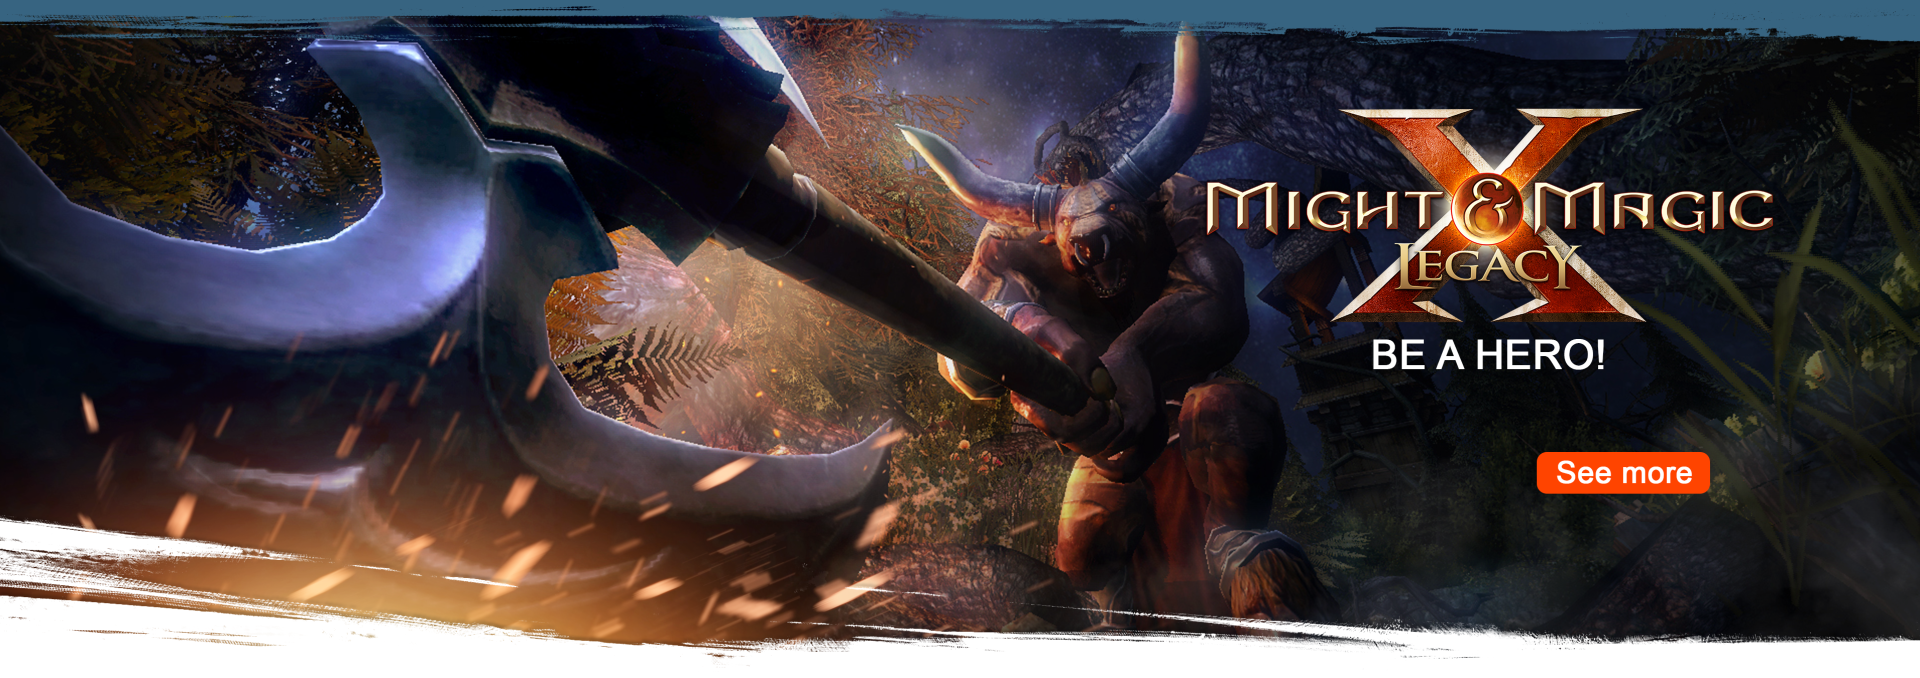 A minotaur attacking with an axe with the Might and Magic X: Leagacy logo on top.